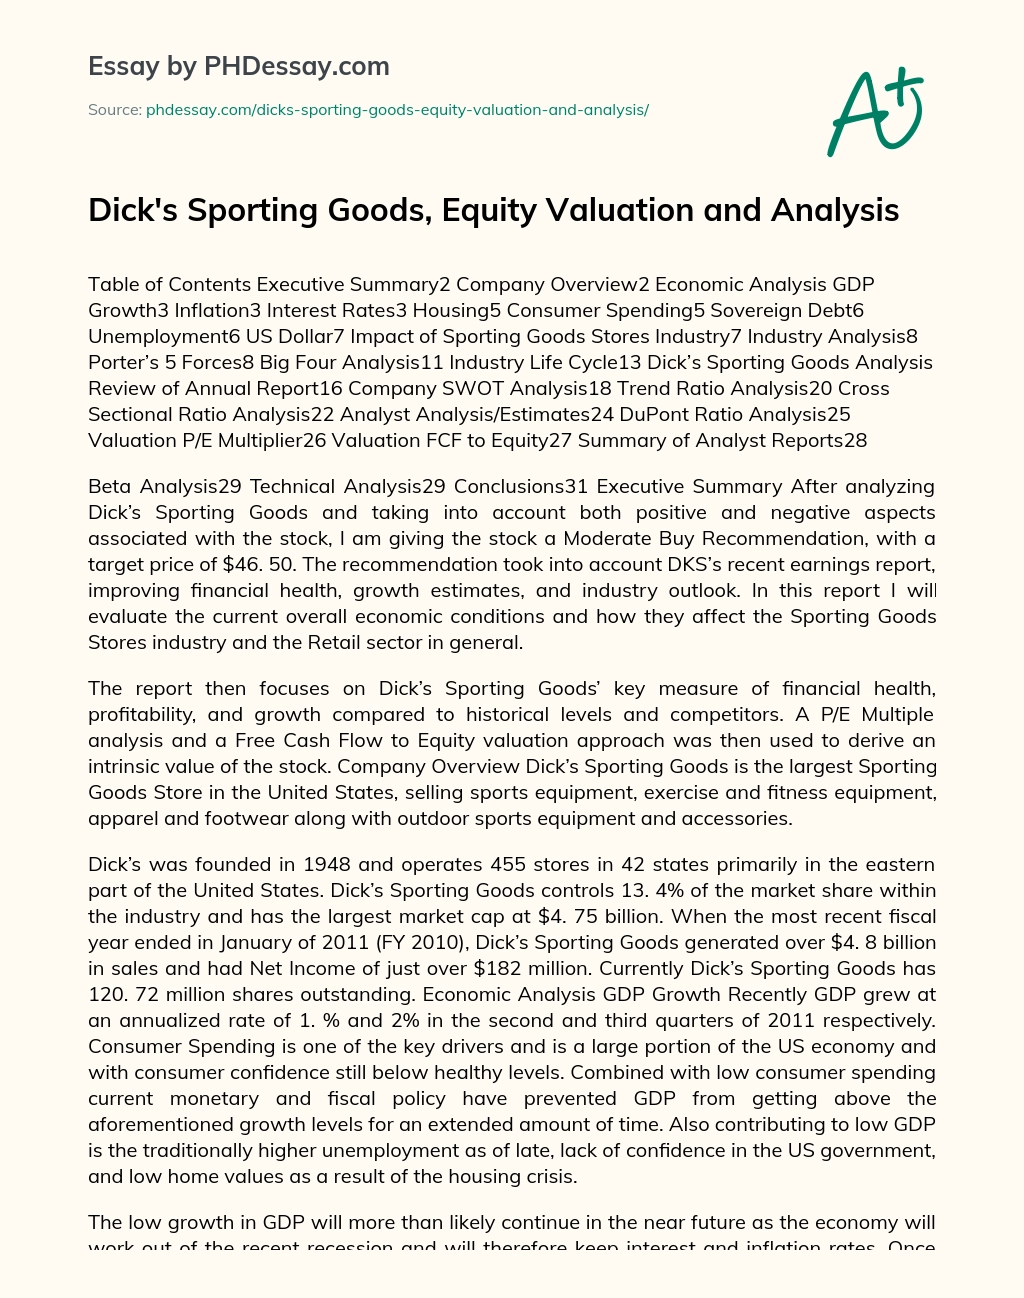 Dick’s Sporting Goods, Equity Valuation and Analysis essay